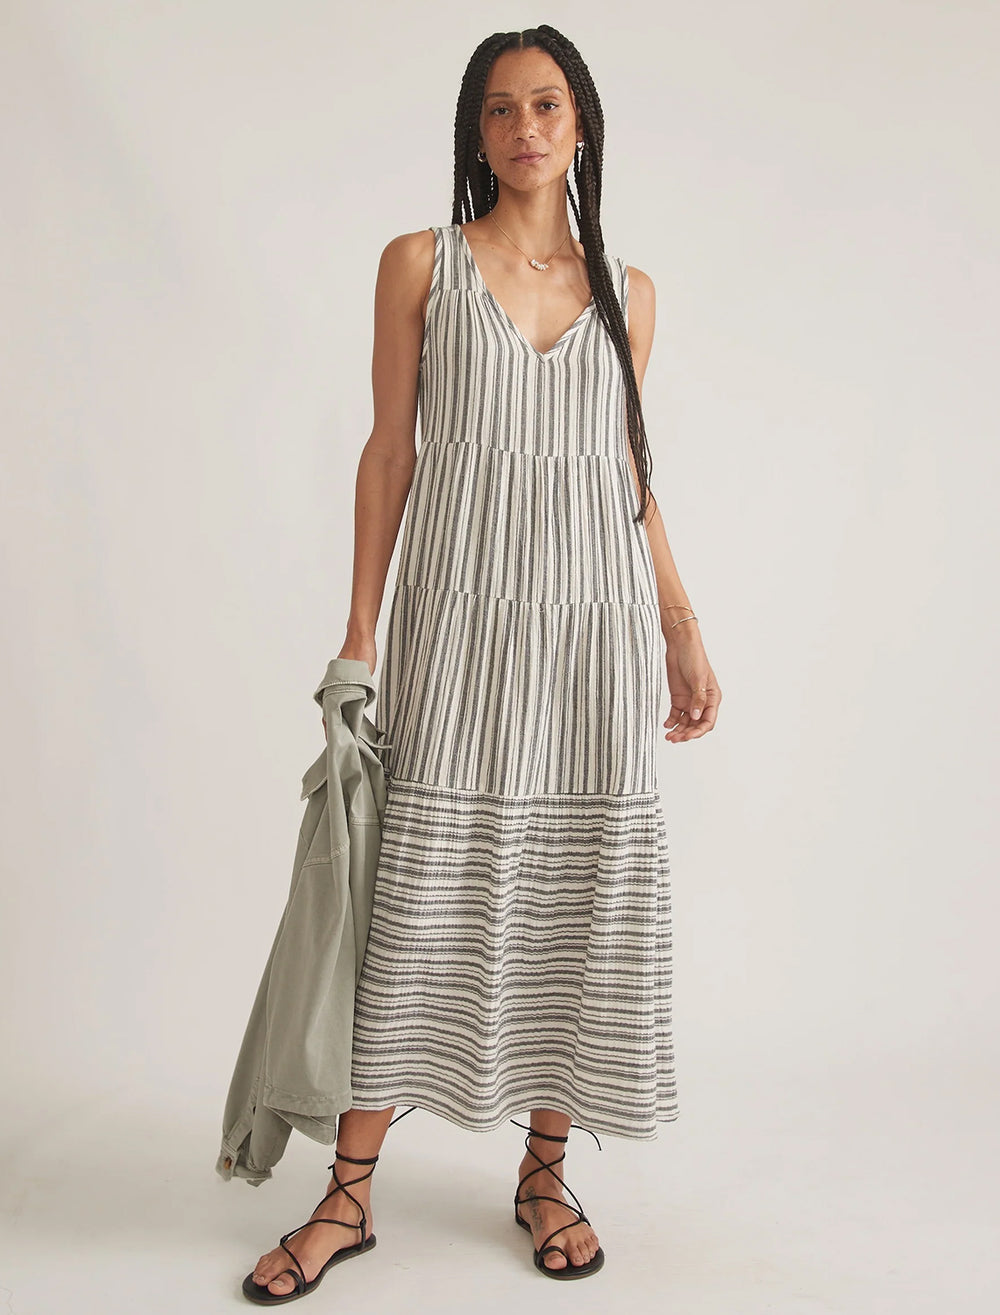 Model wearing Marine Layer's corinne maxi dress in mixed black and white stripe.